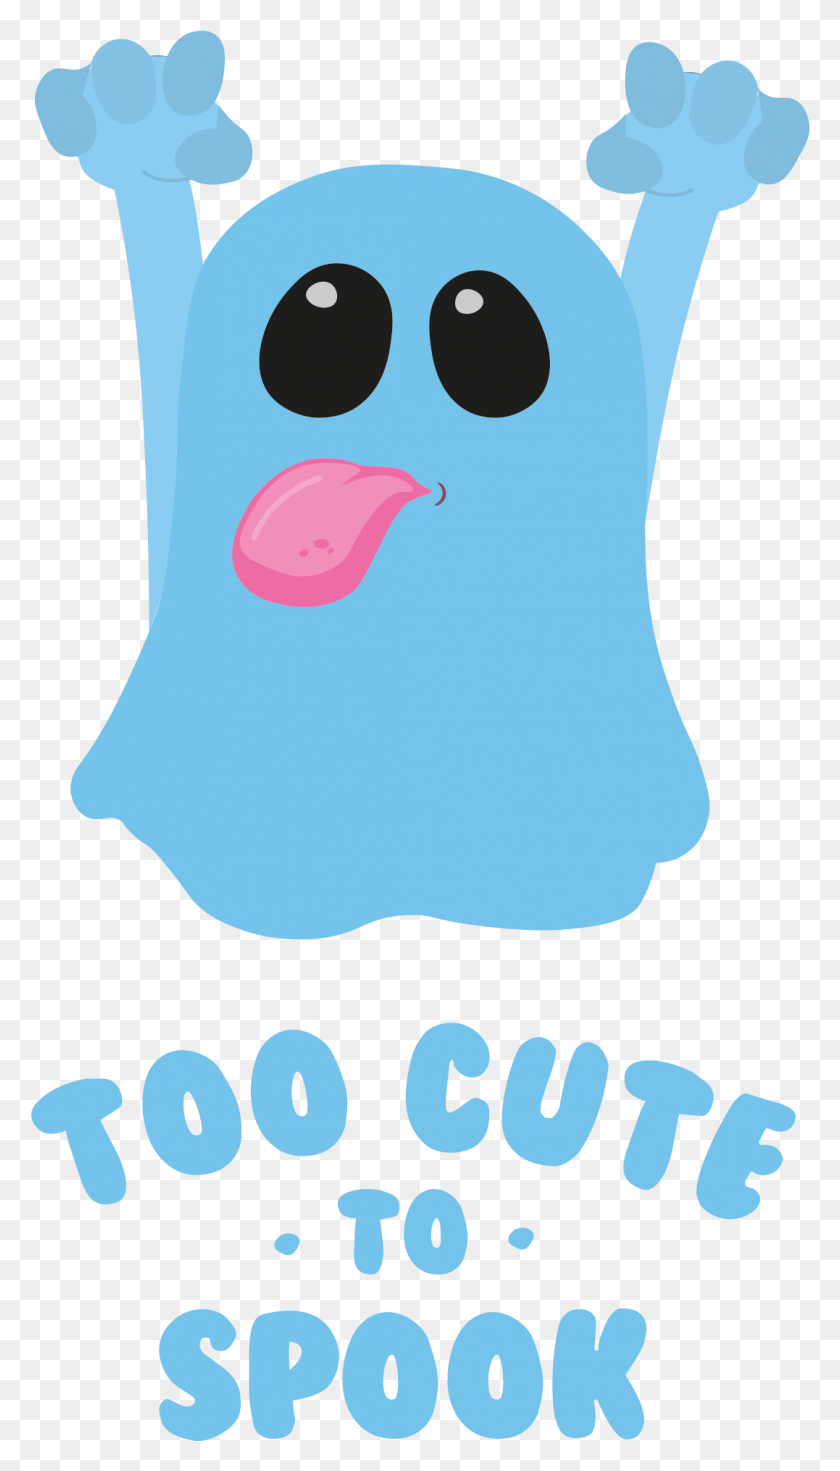 1077x1949 Funny And Cute Ghost Graphic For Halloween Cartoon, Mouth, Lip, Poster Descargar Hd Png